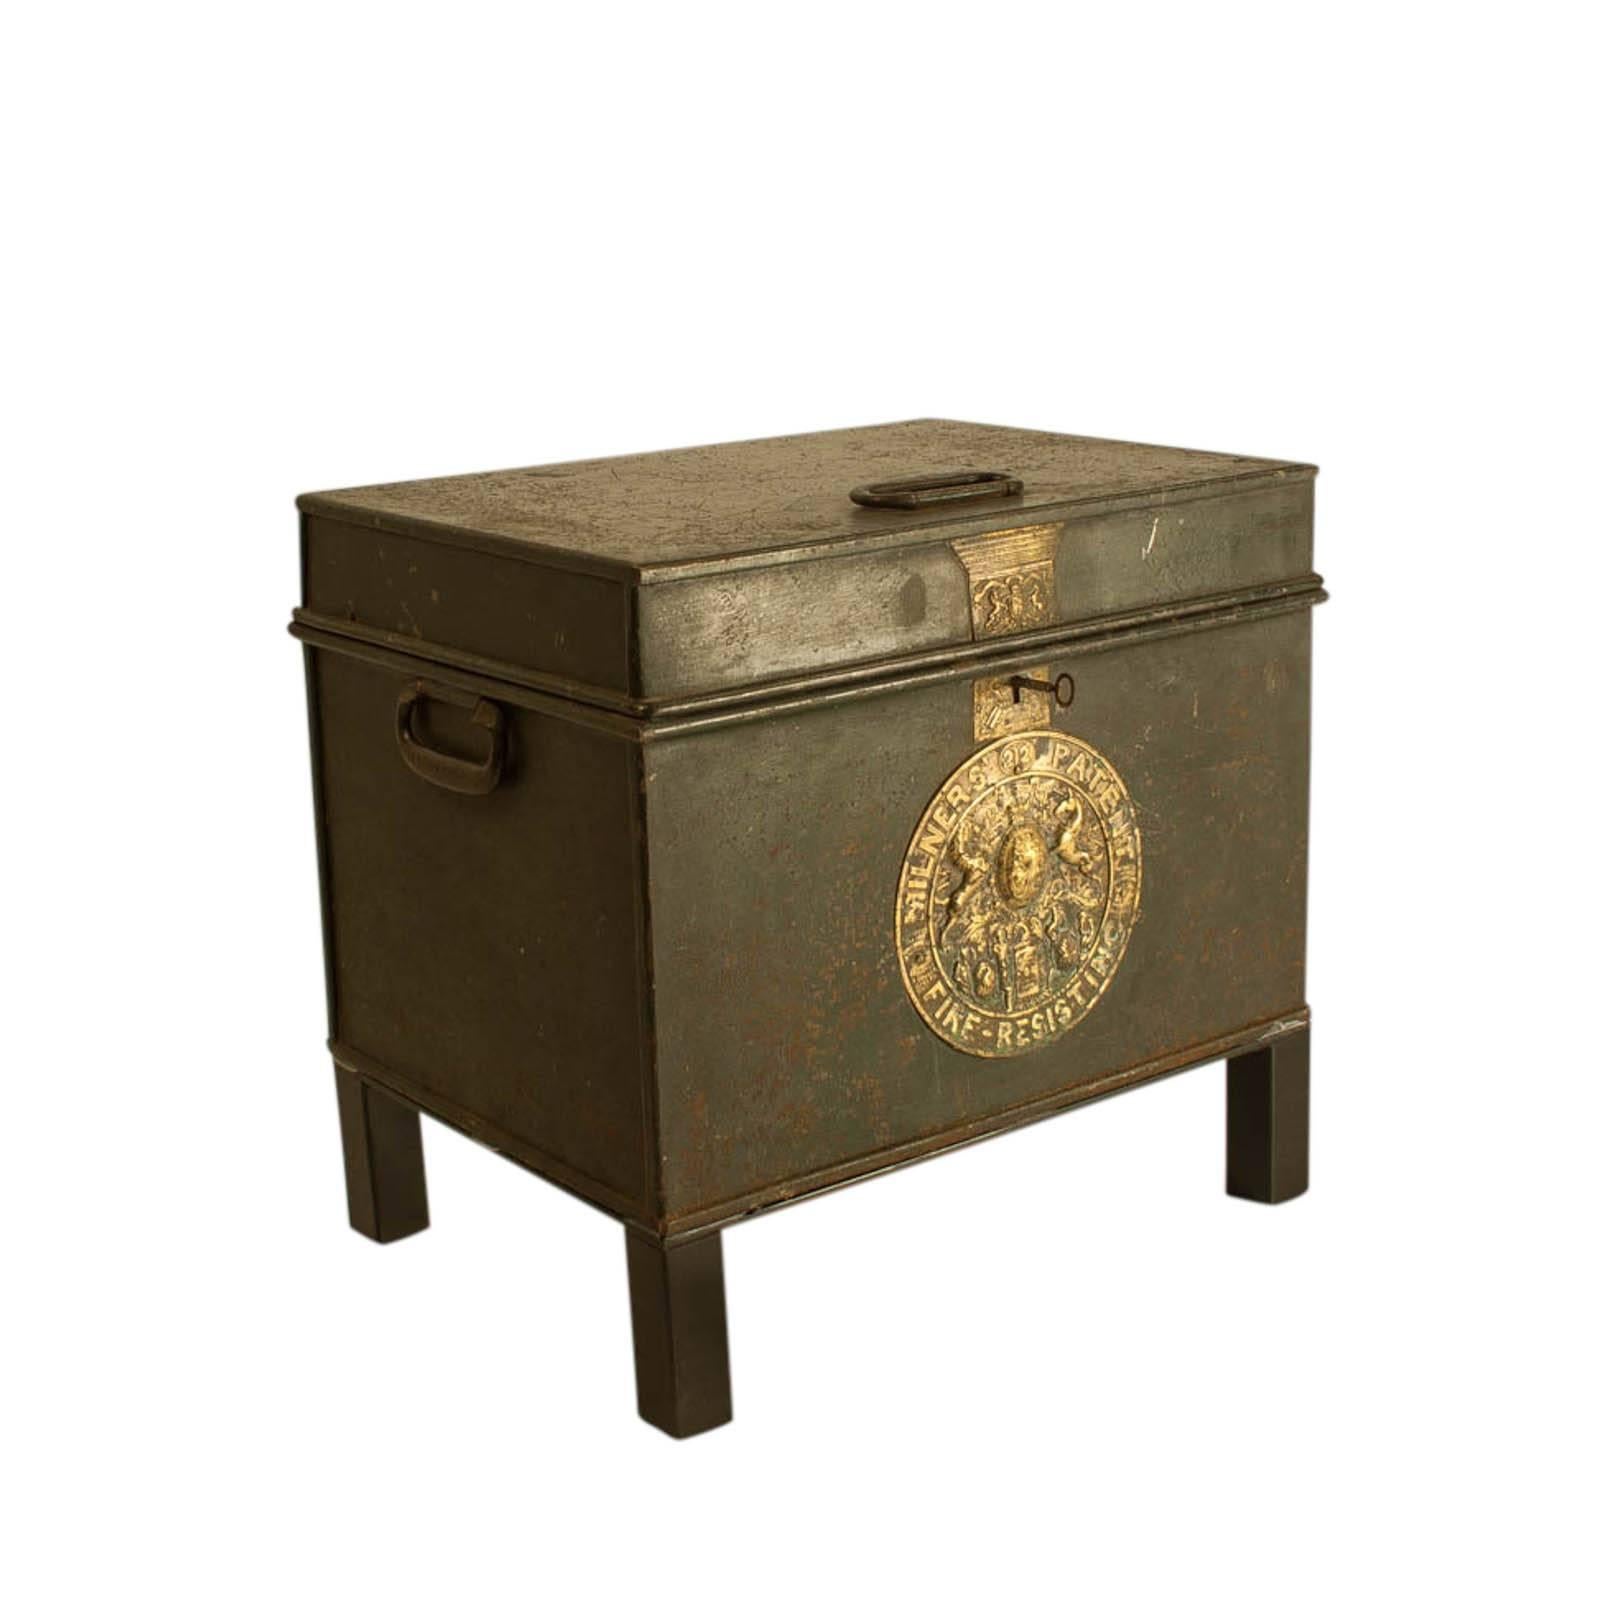 English bottle green painted metal fire safe with gilt brass escutcheons, key and Royal Warrant, circa 1860. Standing on custom iron stands. The interior painted bright green with printed instructions. We have another similar example.